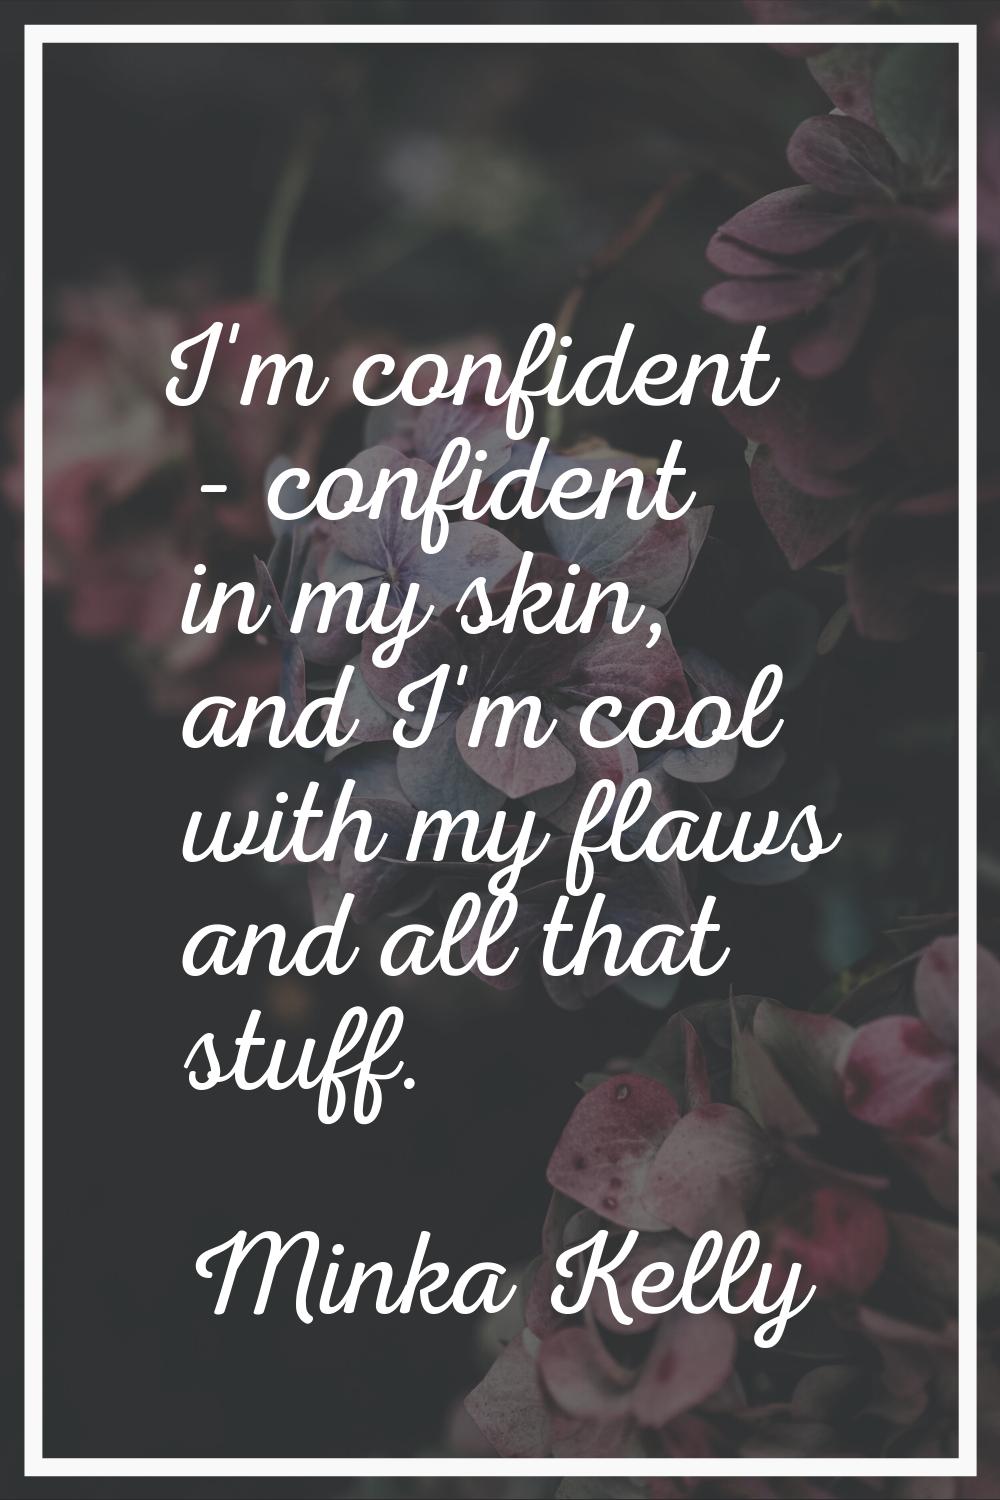 I'm confident - confident in my skin, and I'm cool with my flaws and all that stuff.